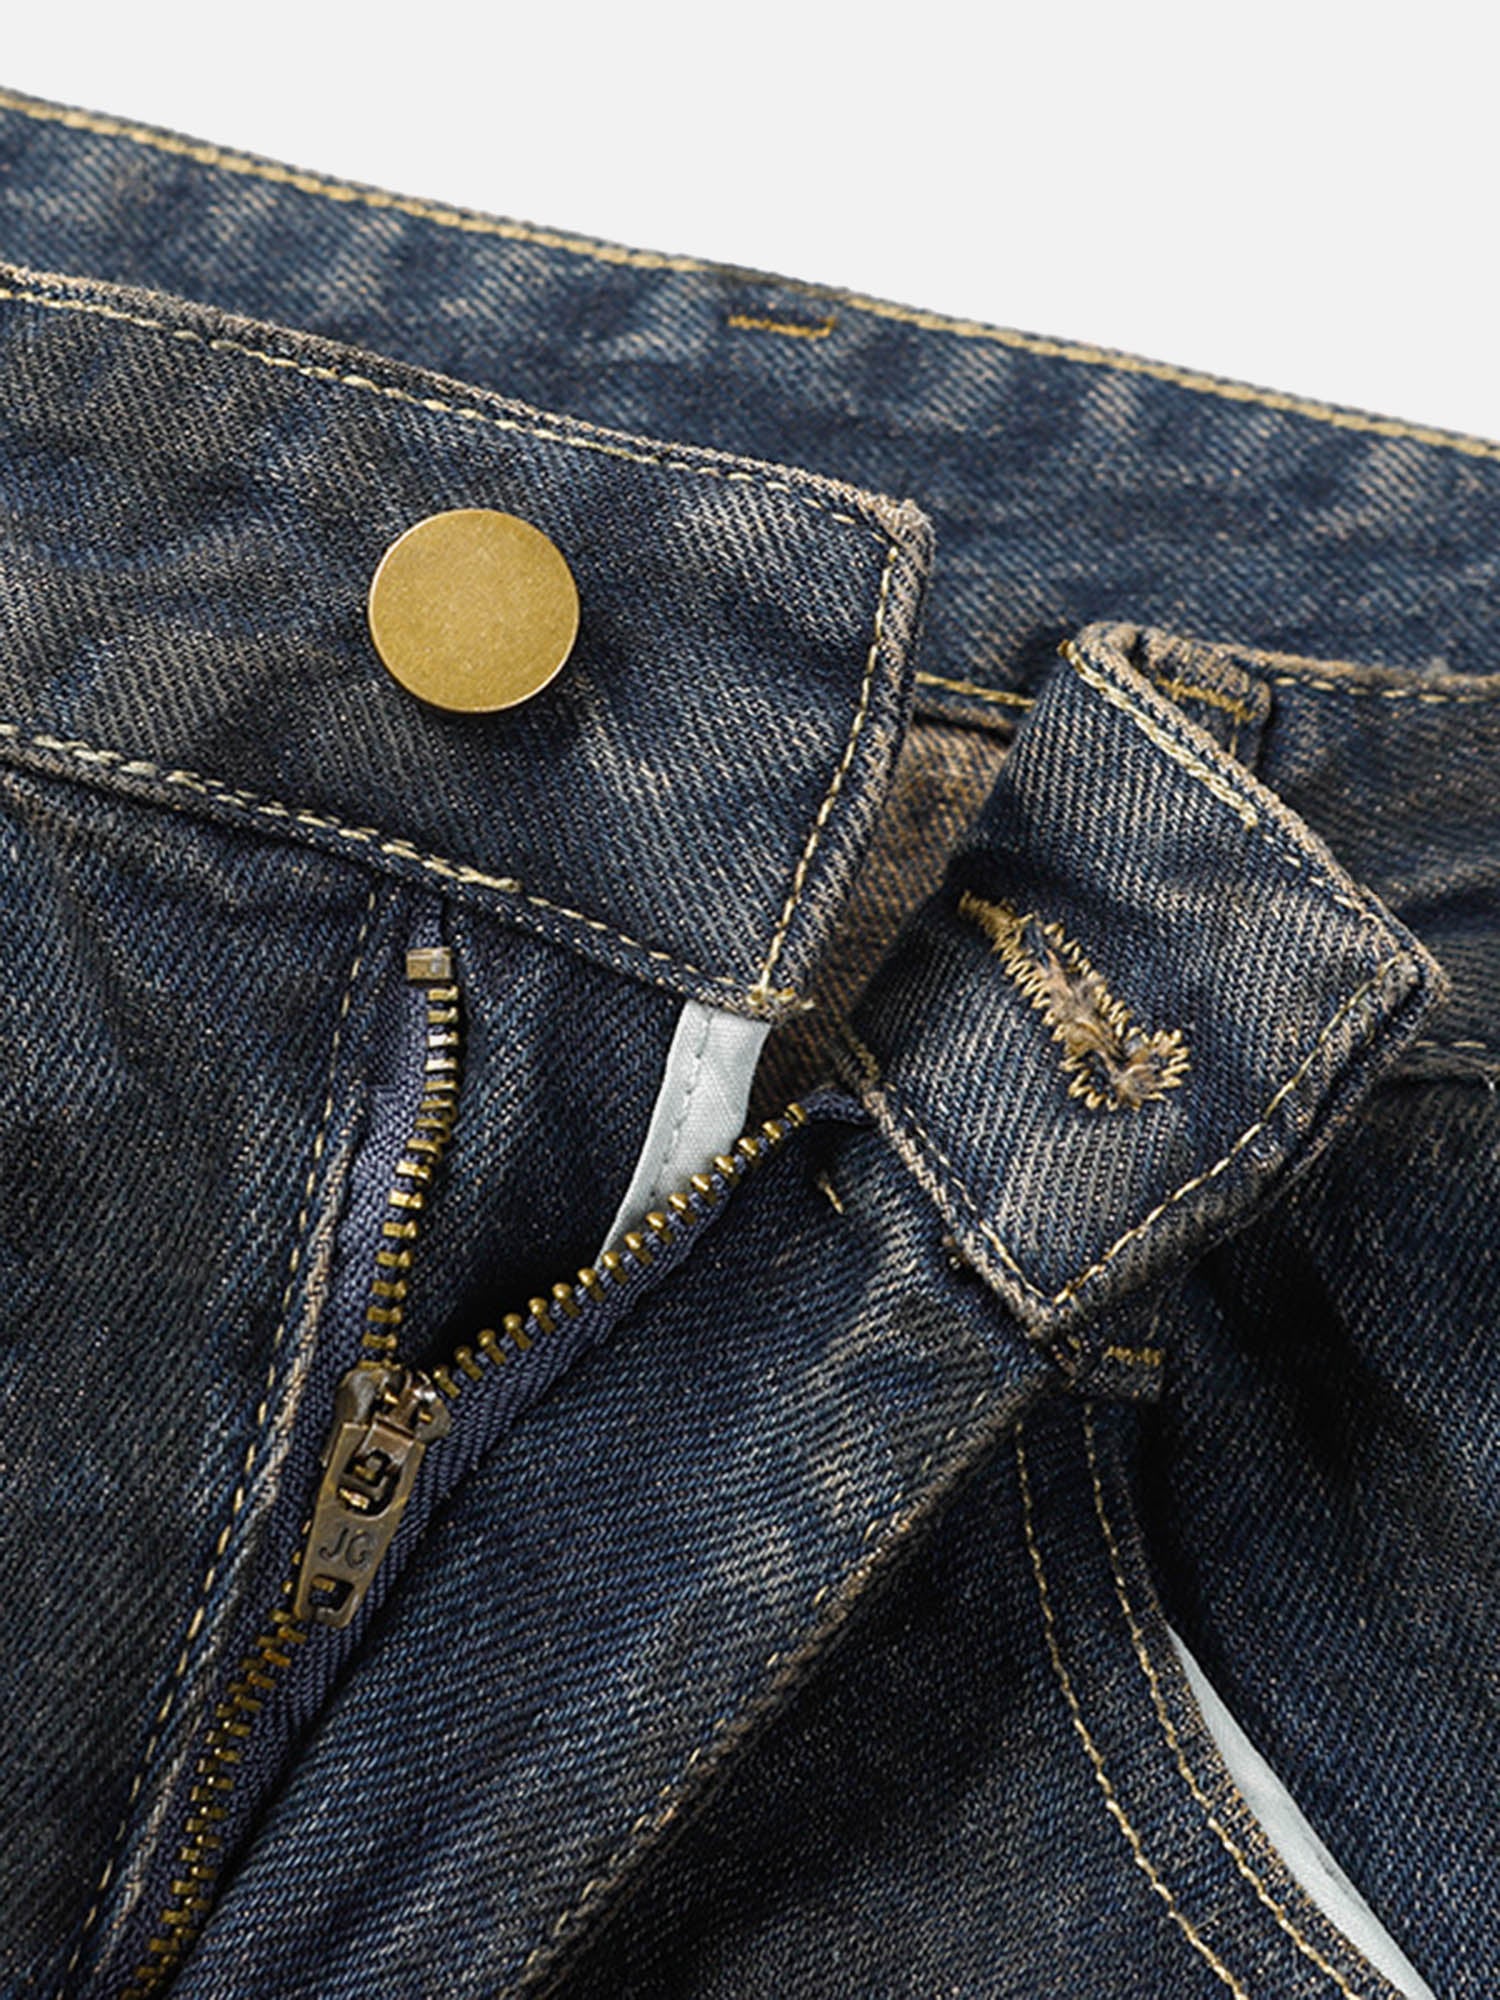 Thesupermade American High Street Heavy Duty Washed Jeans